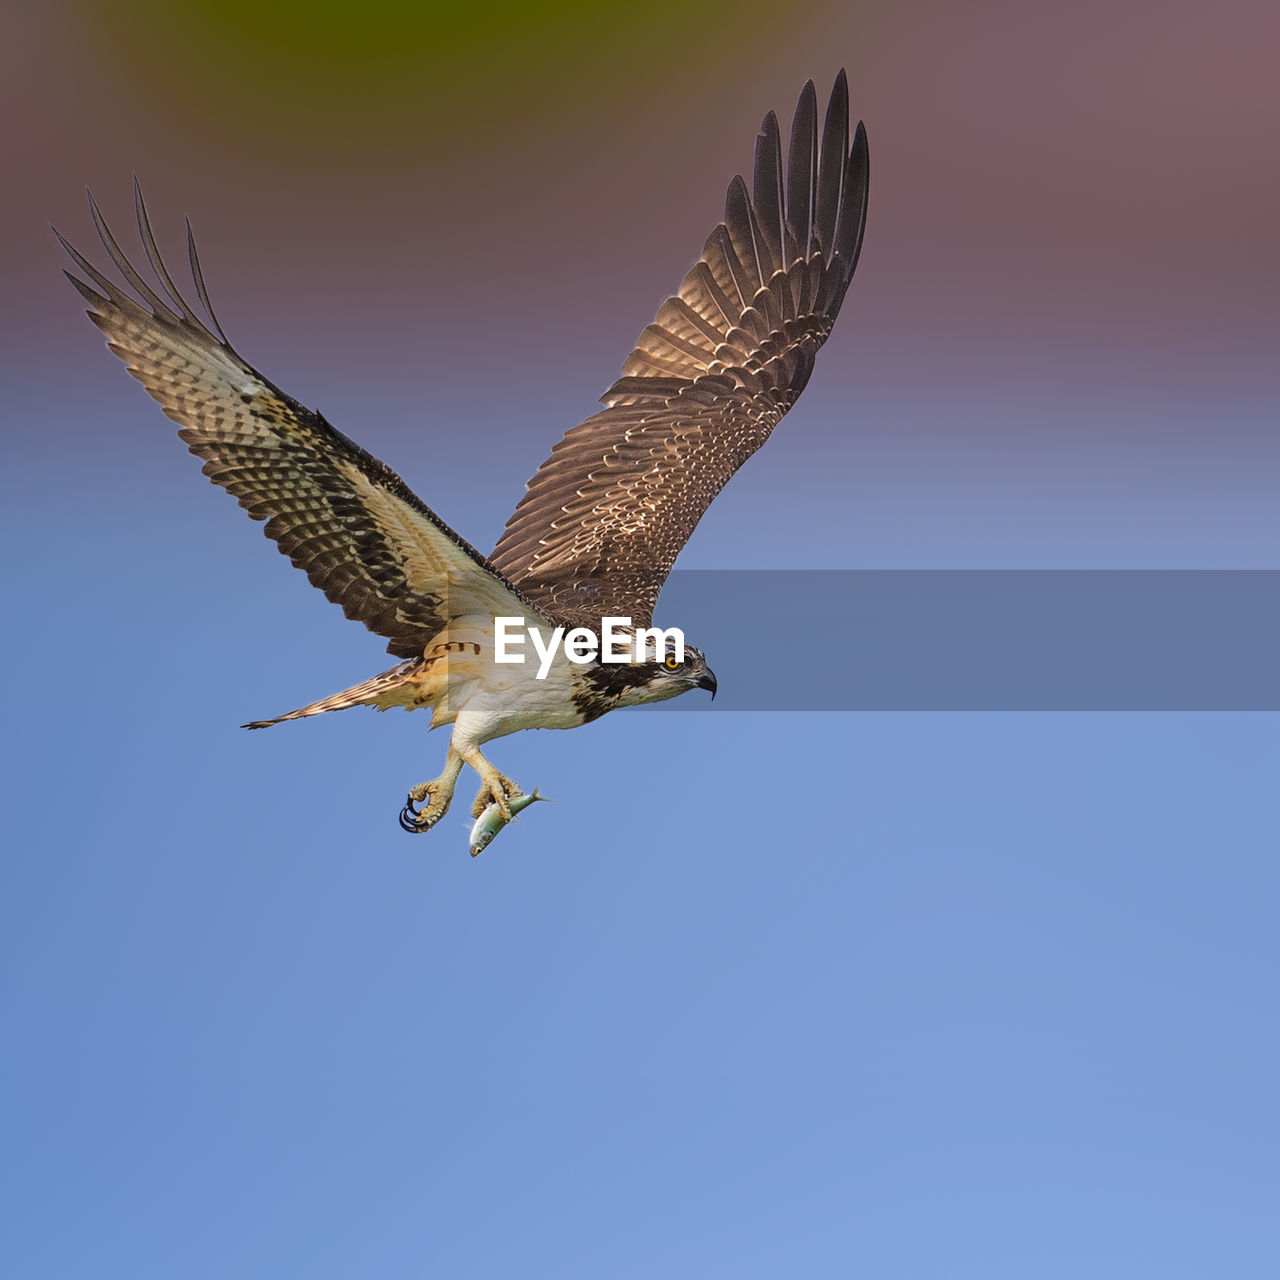 bird, animal, animal themes, animal wildlife, flying, wildlife, bird of prey, one animal, spread wings, animal body part, wing, falcon, buzzard, beak, no people, nature, eagle, hawk, sky, mid-air, blue, animal wing, full length, beauty in nature, clear sky, copy space, motion, outdoors, falcon - bird